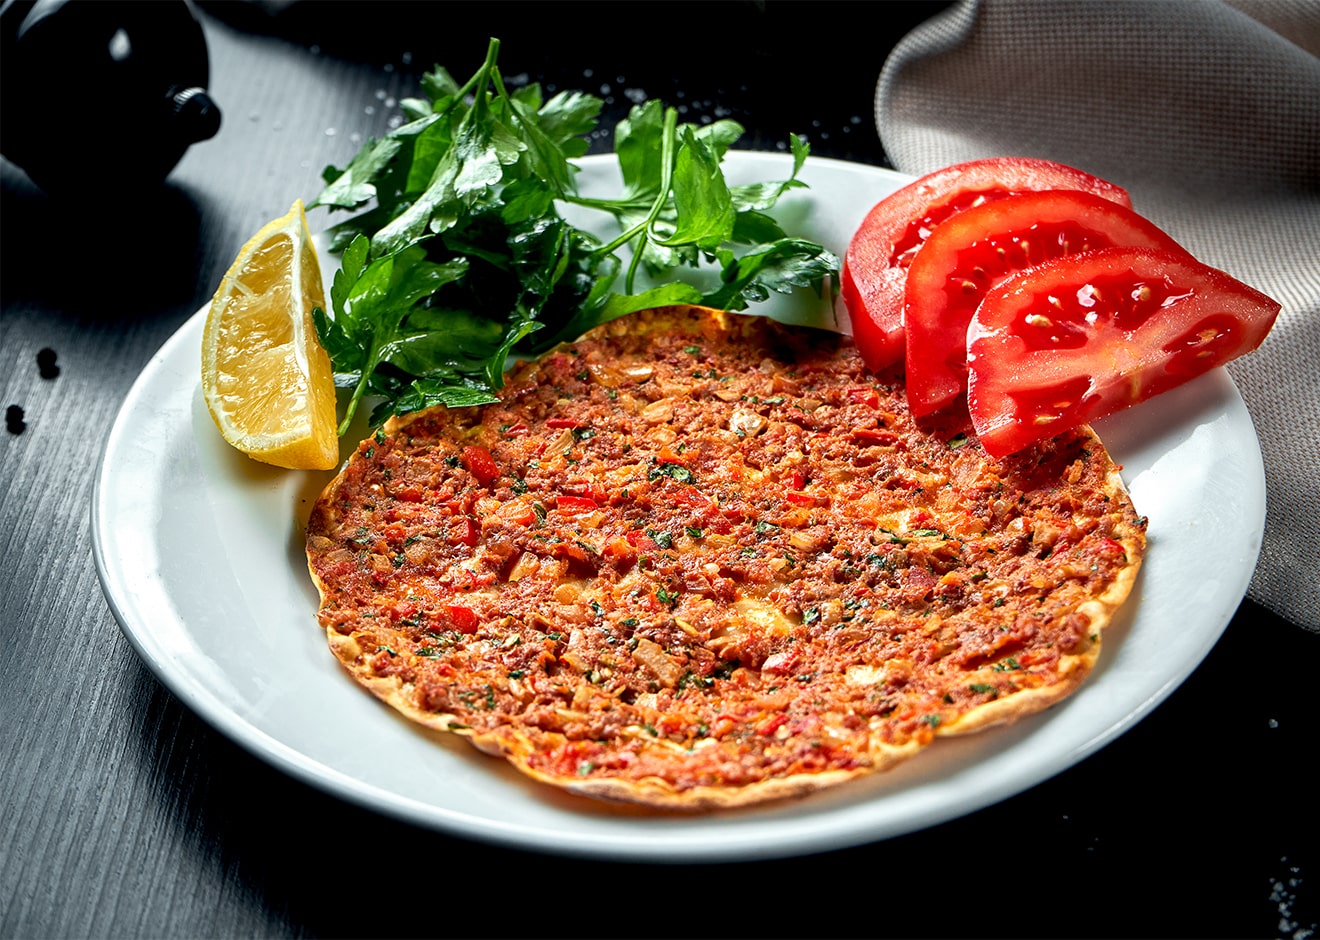 lahmacun served with greens and tomatoes on a plate